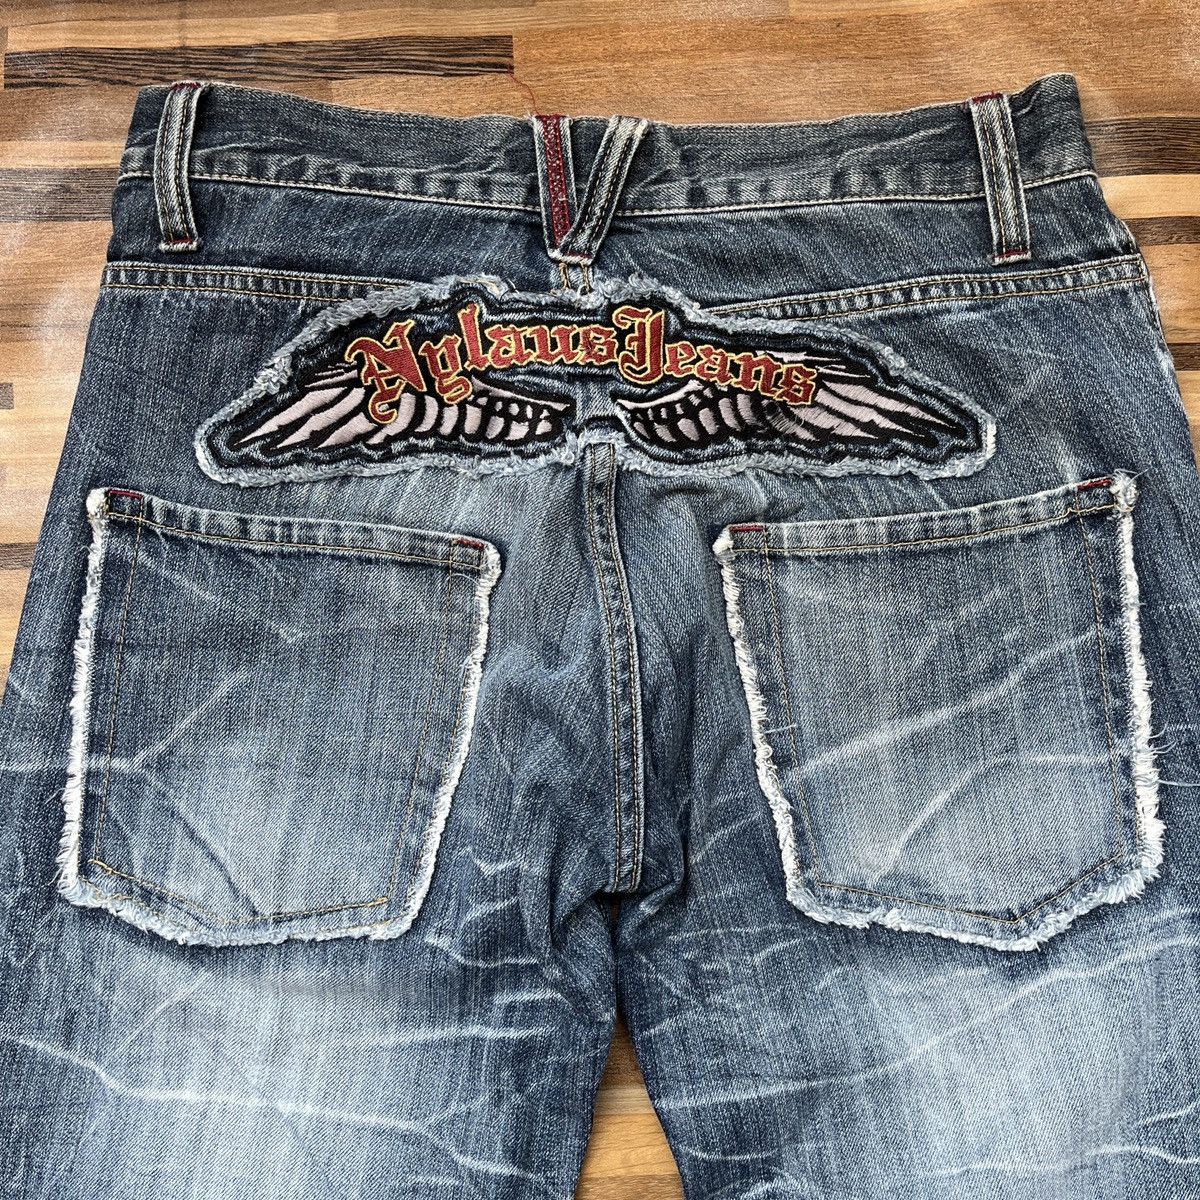 Japanese Brand - Nylaus Clothing Hysteric Style Denim Jeans Seditionaries - 16